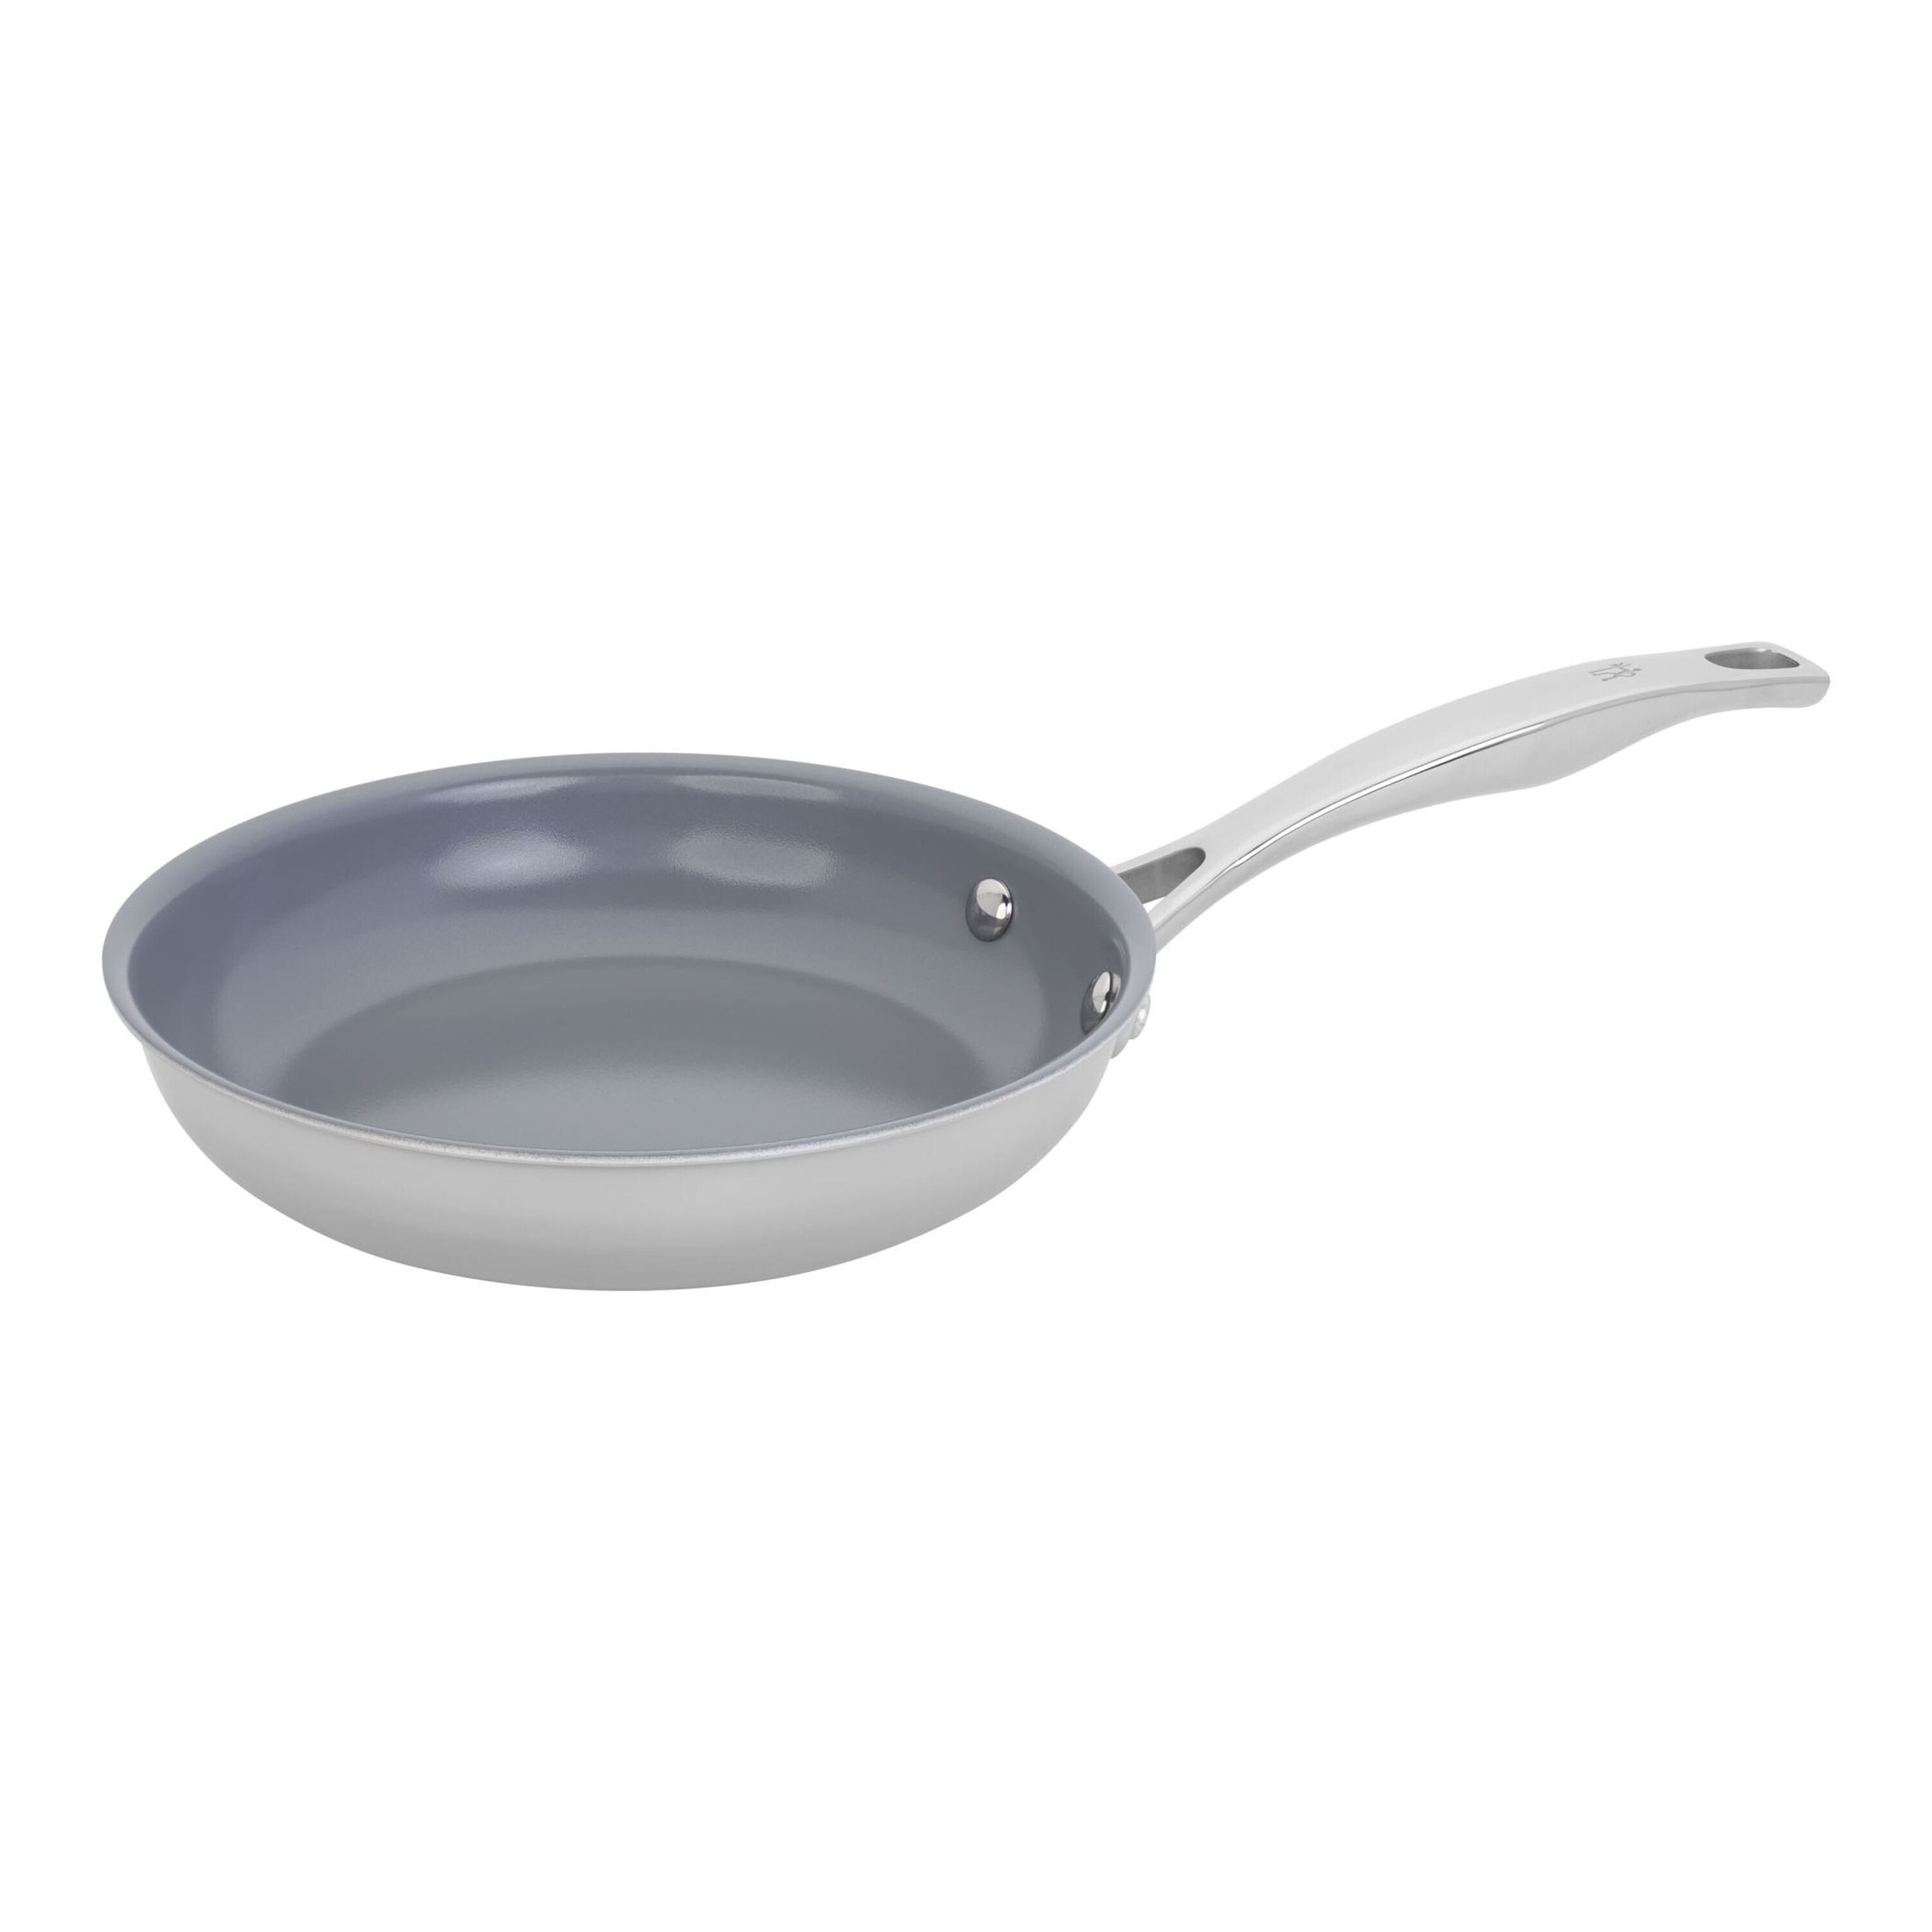 8-Inch & 10-Inch Ceramic Saute Pan with Lid | Xtrema 8-Inch